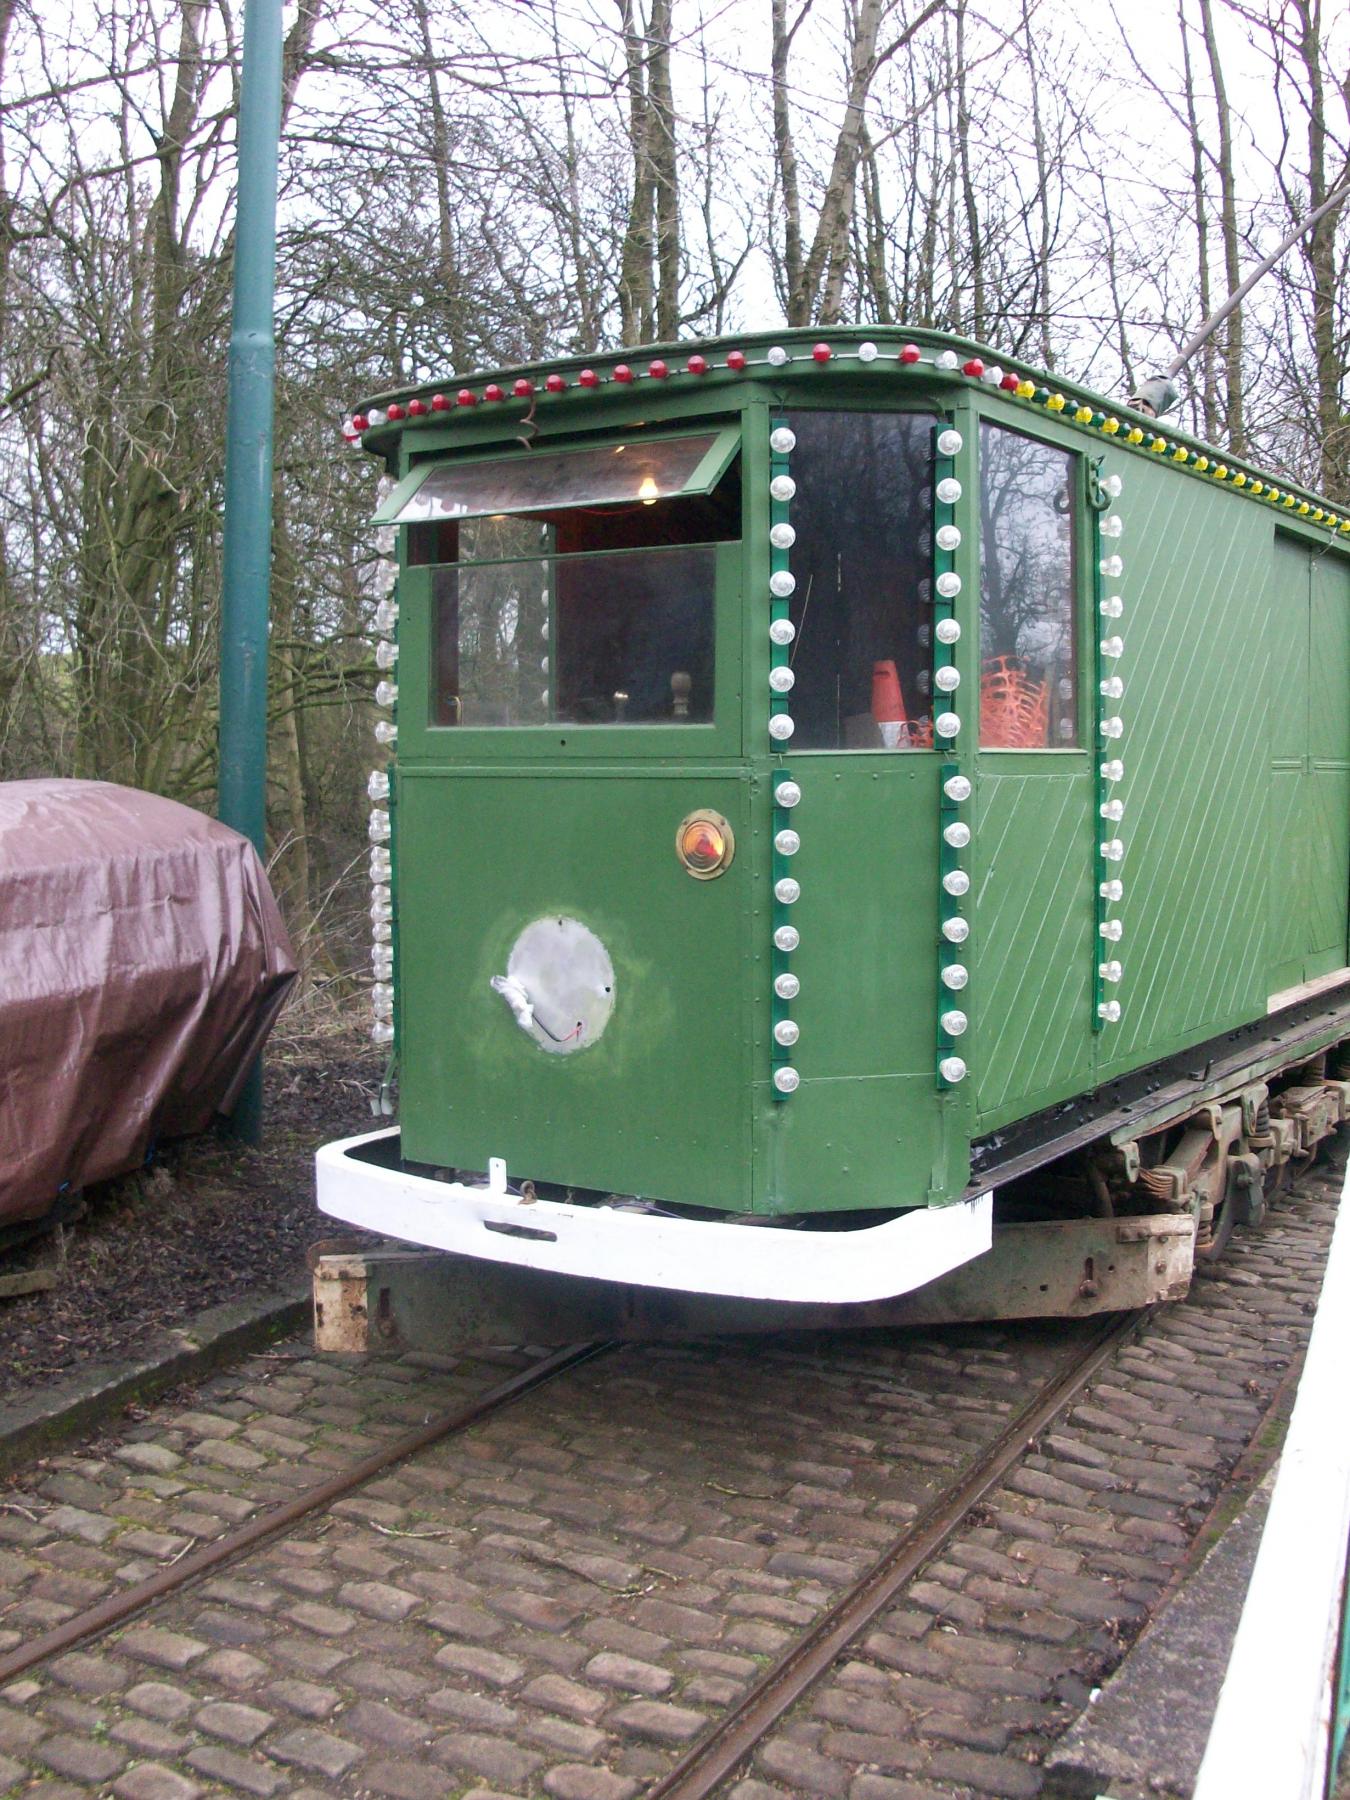 Heaton Park Tramway 752 on the Depot Slope